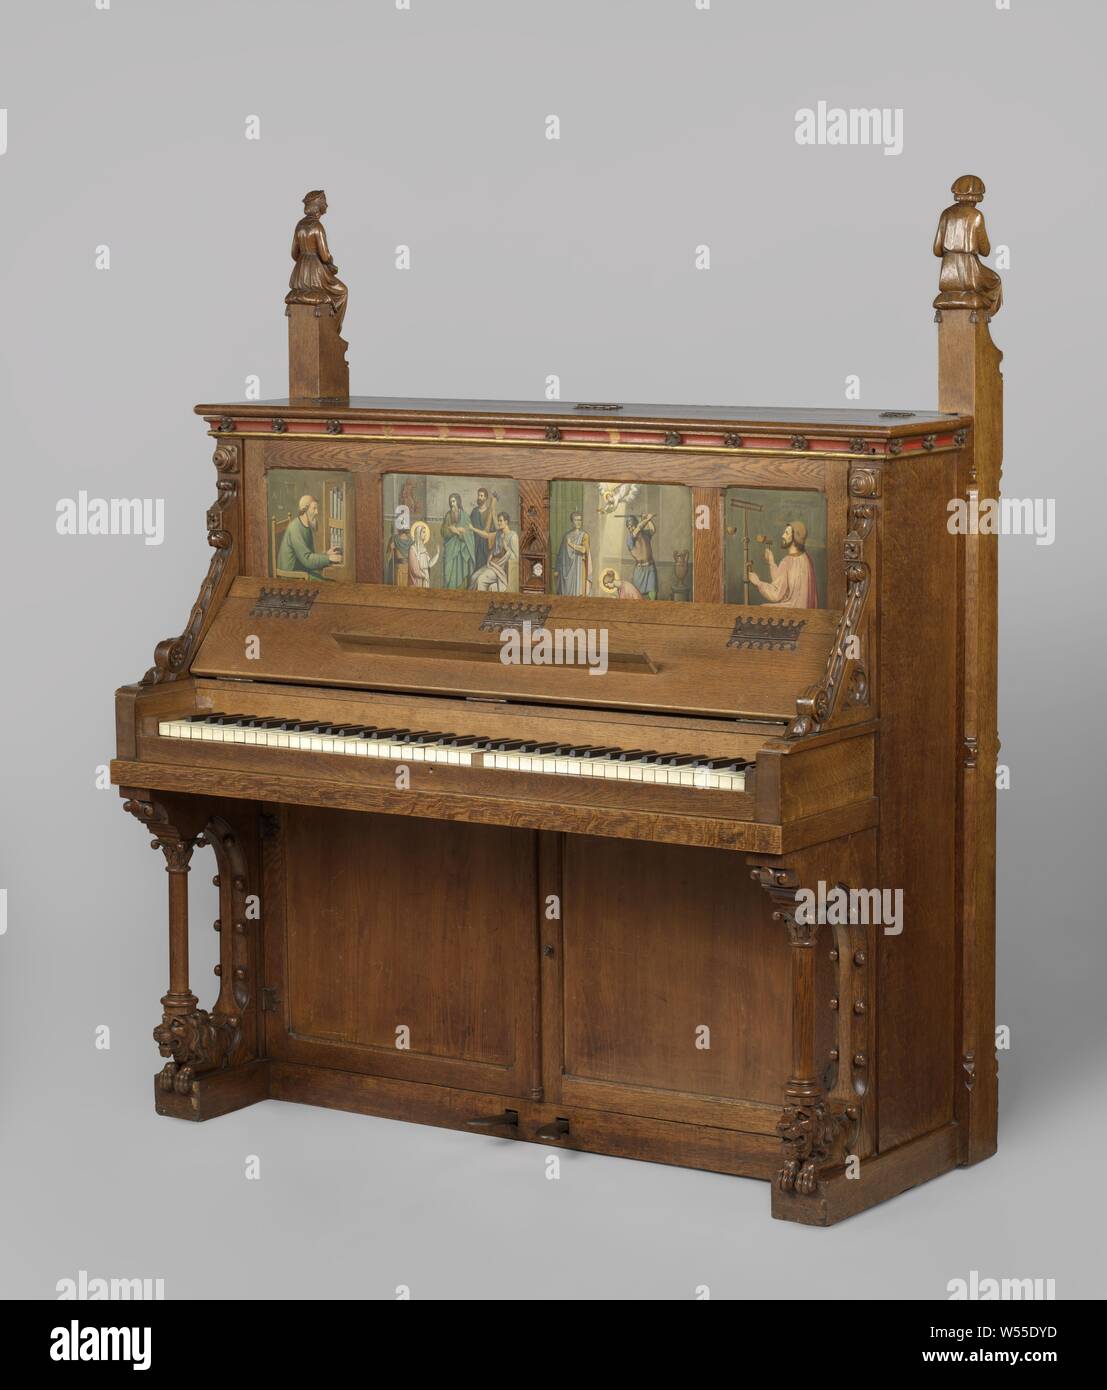 Music cabinet and piano with a relic or St Cecilia Music cabinet and piano with a relic or St Cecilia Piano whose cabinet is partly painted in oak and pine with colors and gold on the front a rear glass placed relic, Piano, of which the oak and pine cabinet is partially painted in colors and gold. The pillars bearing the keyboard rest on lying lions coming out of the cupboard, and the two high corner posts are crowned by the figures of a flute player and a citizen player, with the faces of Cuypers and his wife Antoinette. On both sides of the relic of St Cecilia placed behind glass, painted Stock Photo